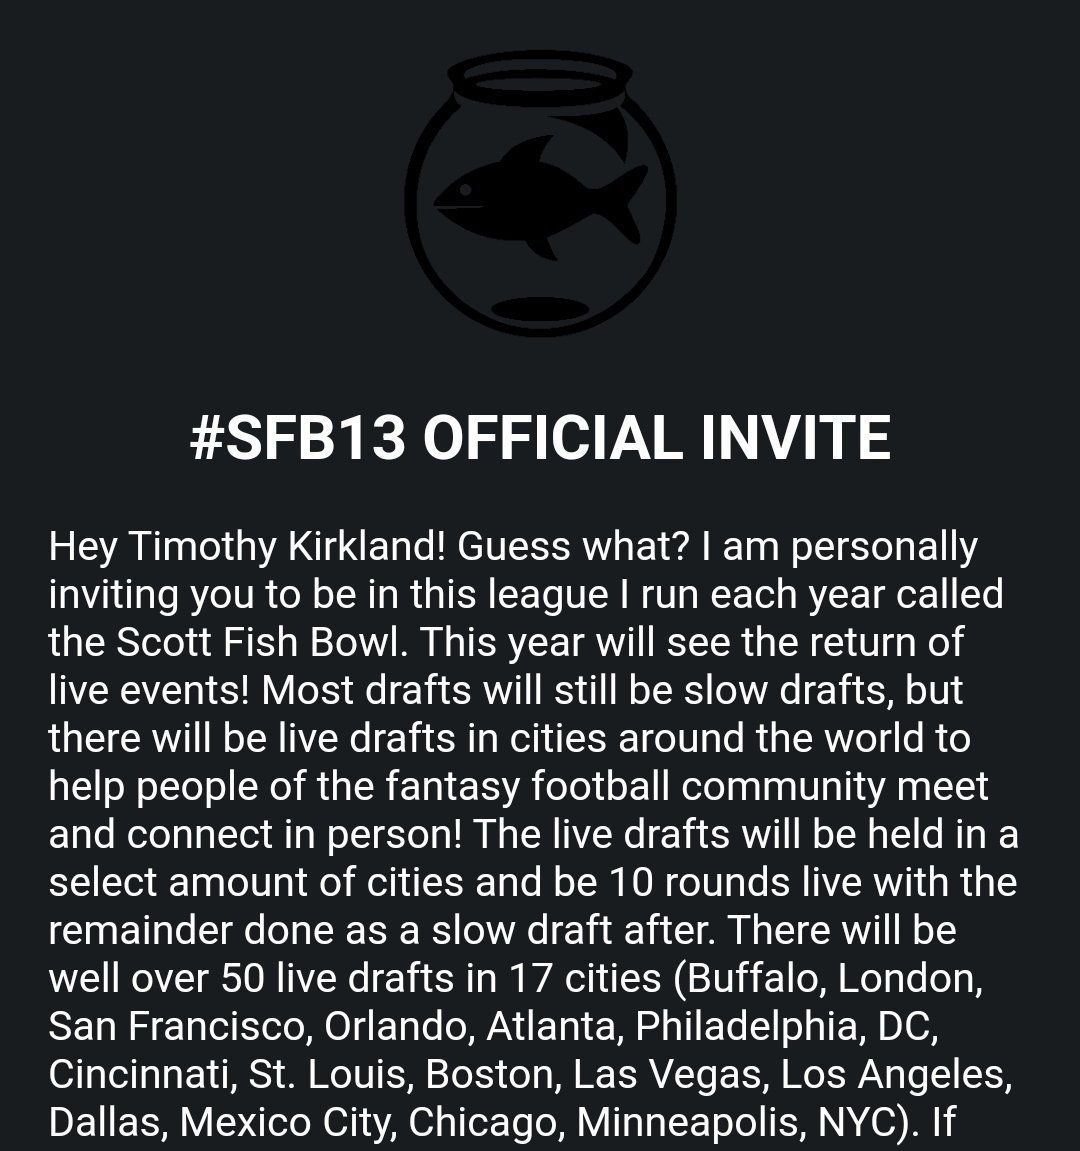 What a way to start the week! Thank you to @ScottFish24 and the team for everything they do. Special thanks to @RyanMc23 , @Spydes78  , and everyone in the hopefuls chat for helping so many of us get in. Please check out @FantasyCaresOrg and consider getting involved! #SFB13